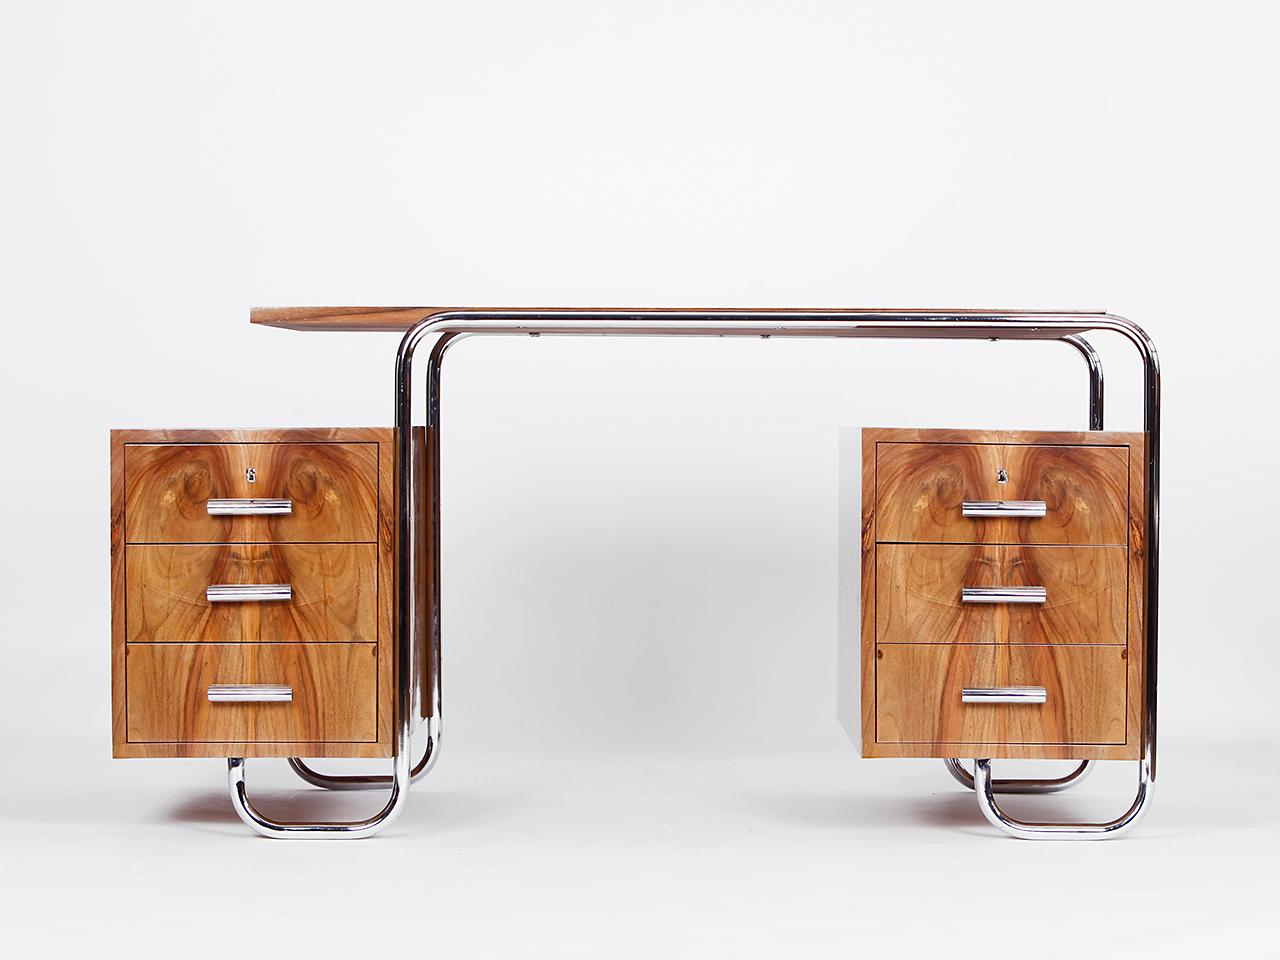 Art Deco Functionalist Tubular Steel Desk by Gottwald and Chair by Slezak 1930s For Sale